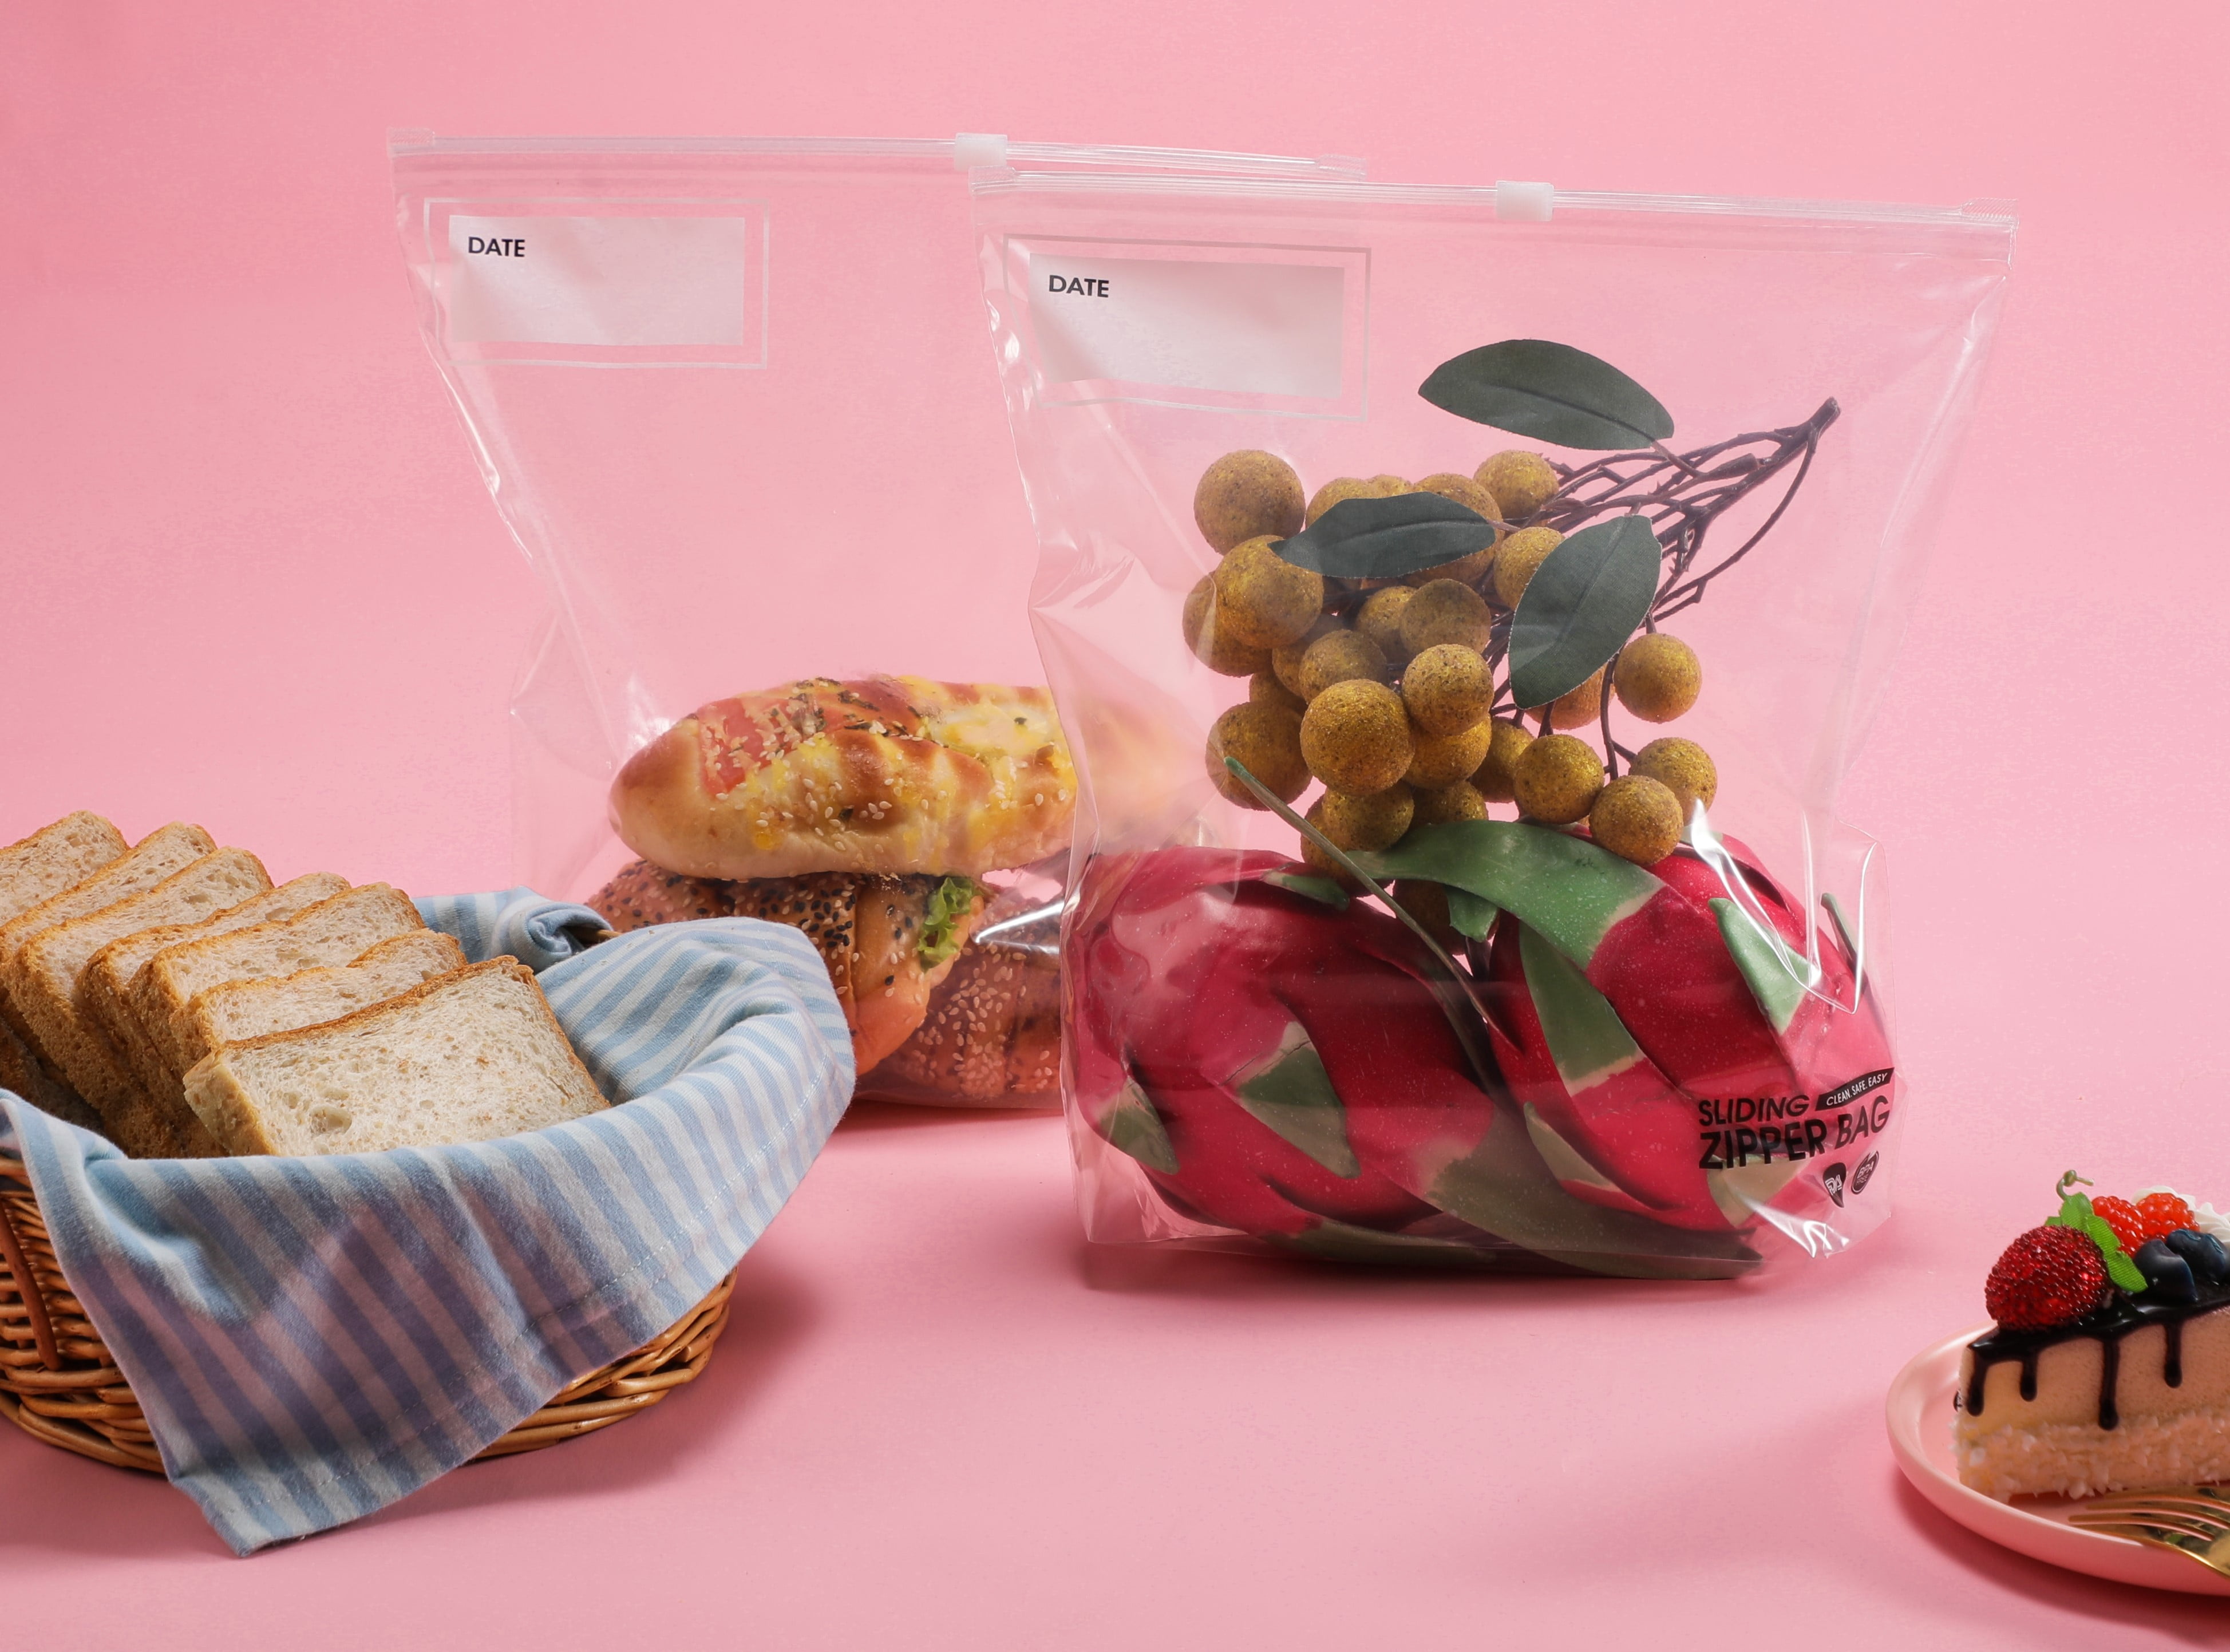 Ziploc 24-Pack-Gallon Food Bag in the Food Storage Containers